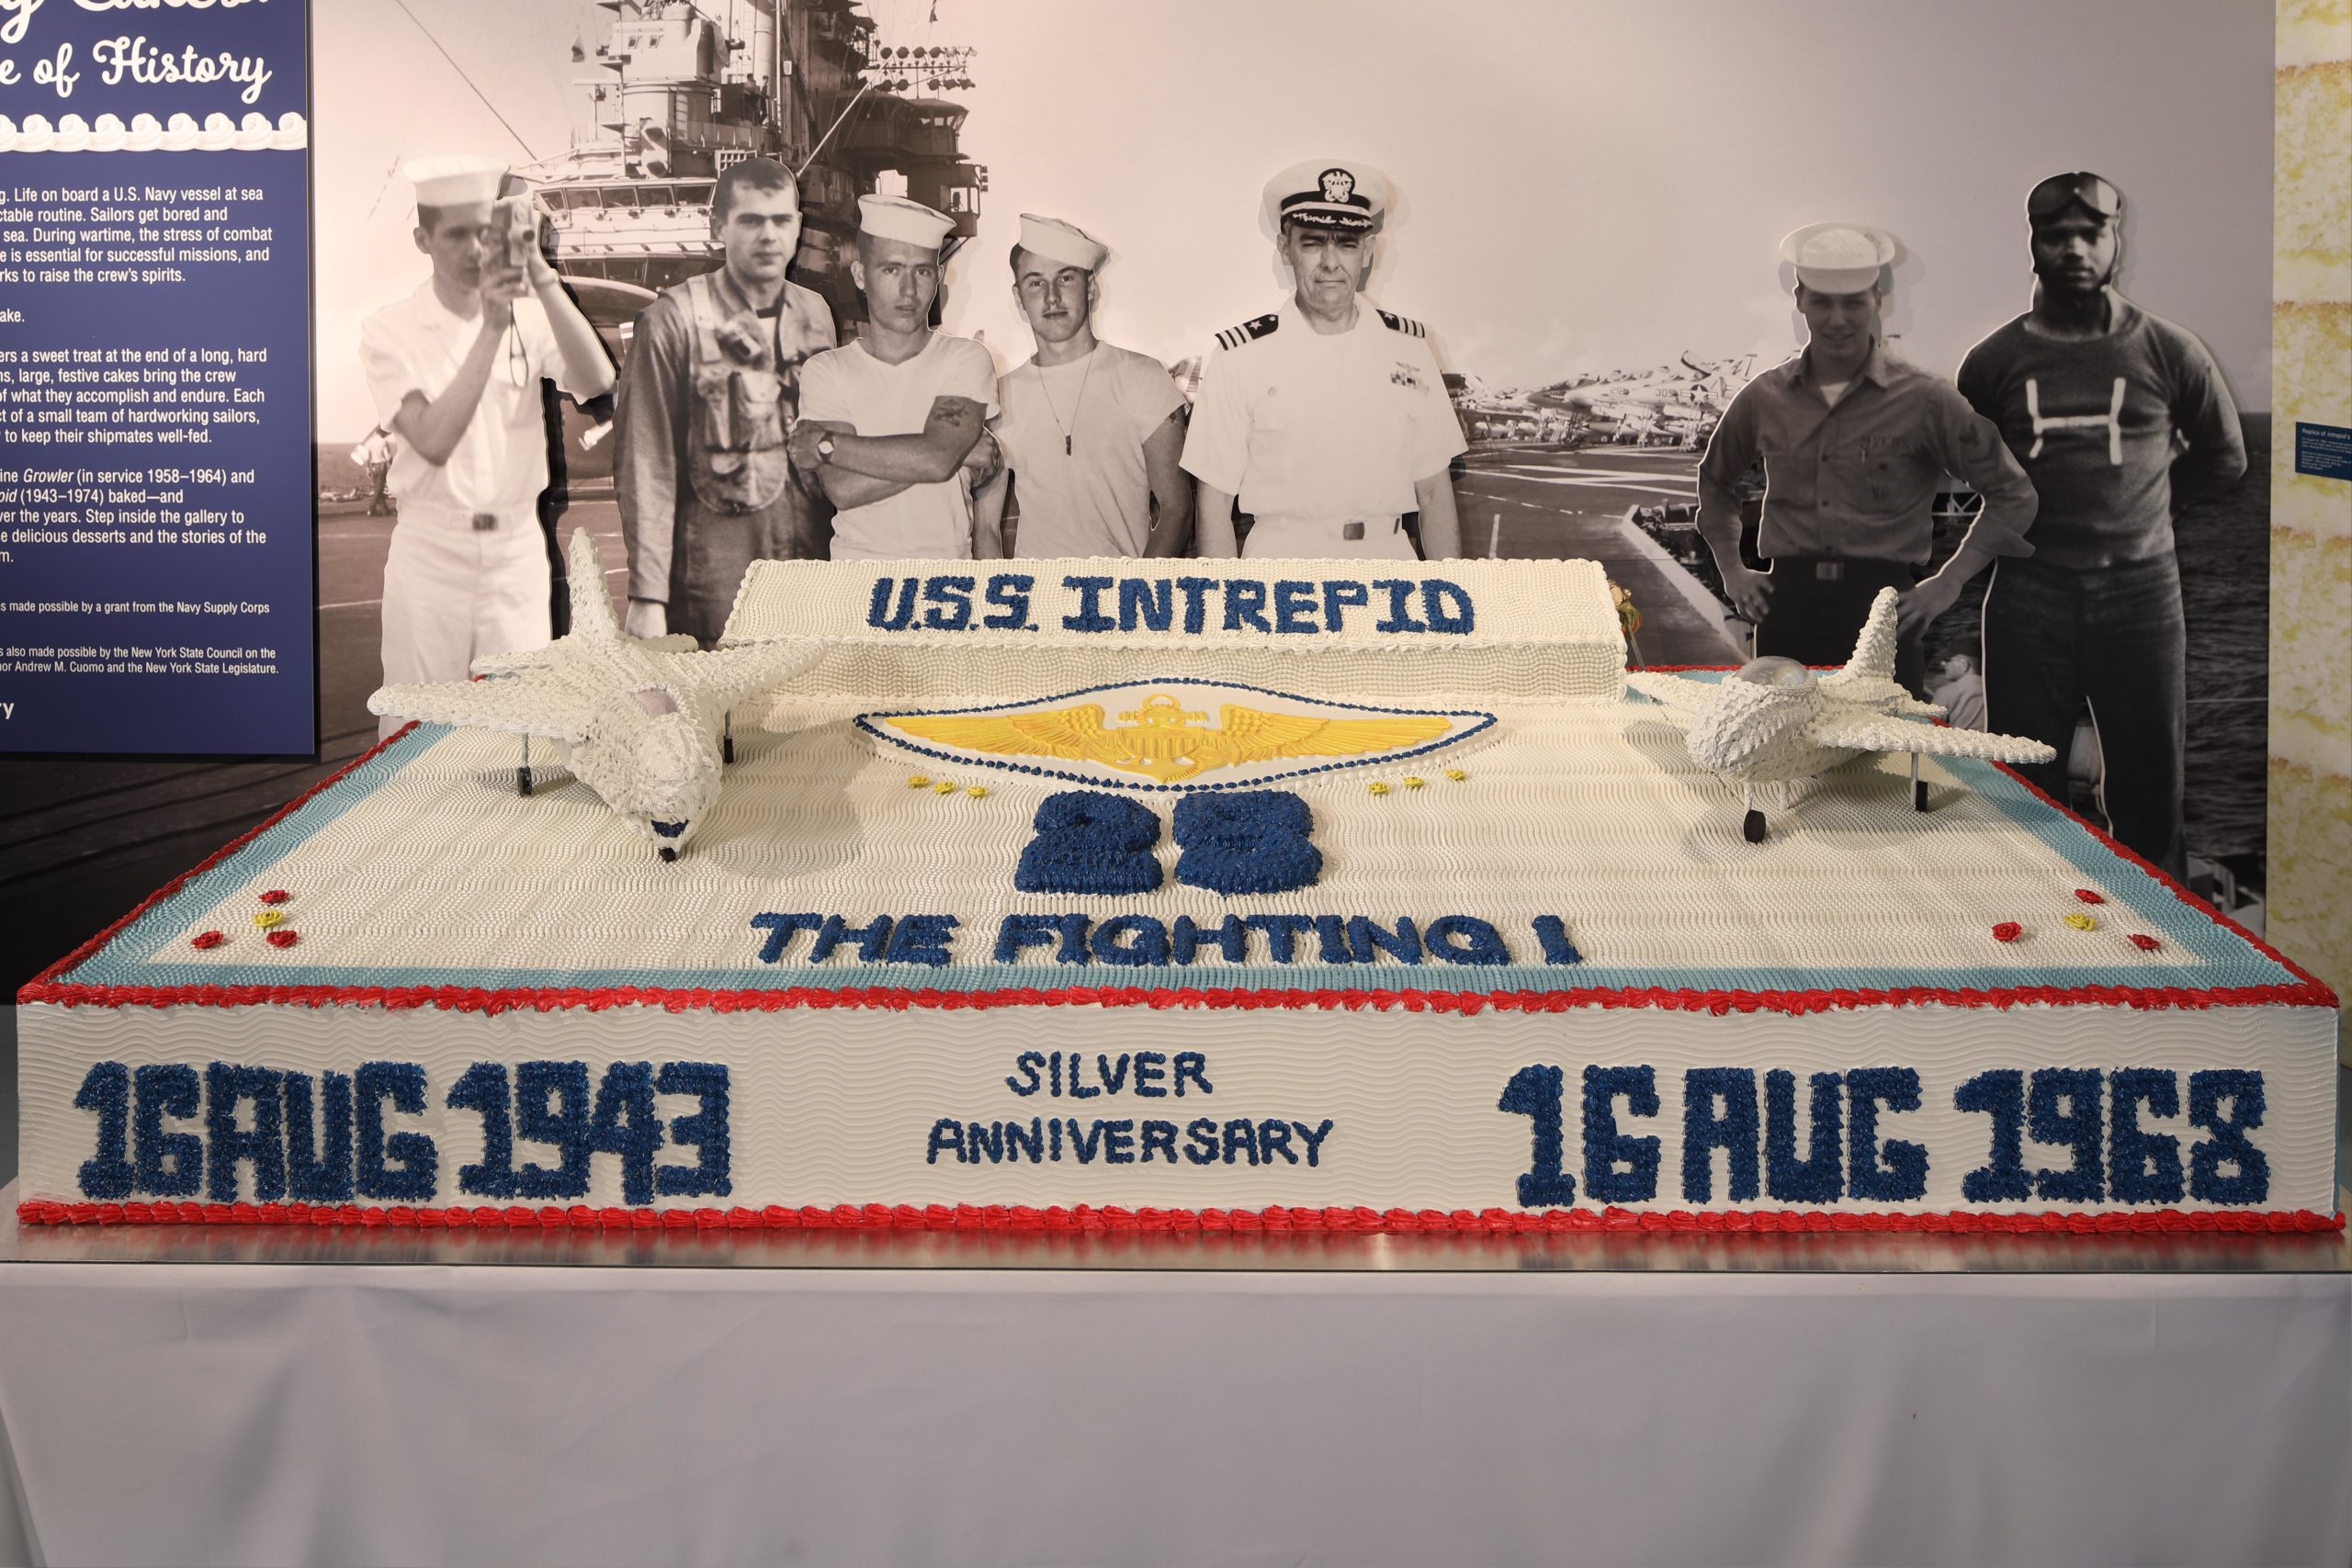 Photo of full-size reproduction of Intrepid's giant 25th anniversary cake with life-size photos of crew members behind it